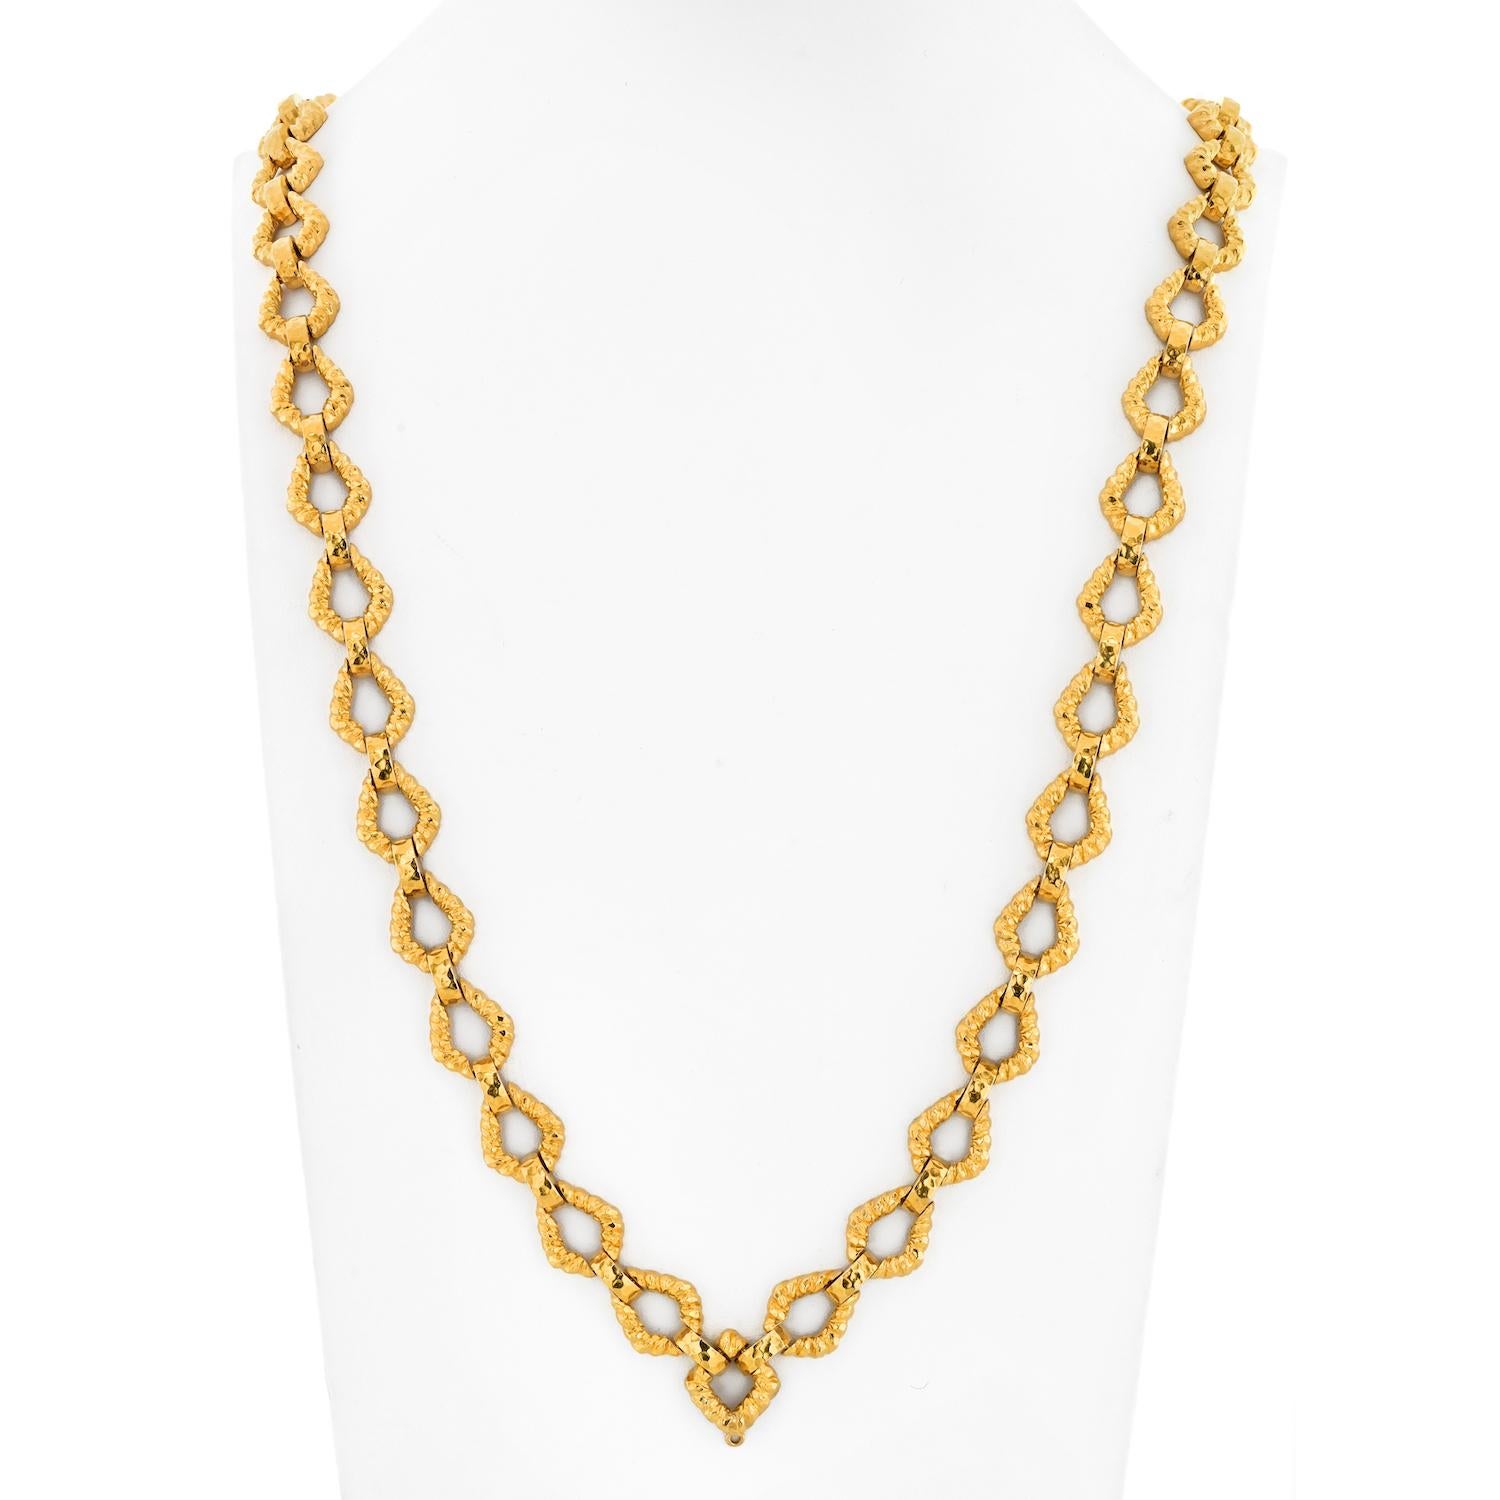 The textured link yellow gold chain necklace by David Webb is a striking piece of jewelry that boasts both beauty and substance. Measuring 31 inches long and weighing 205 grams, it is a substantial piece that commands attention. 

The intricate